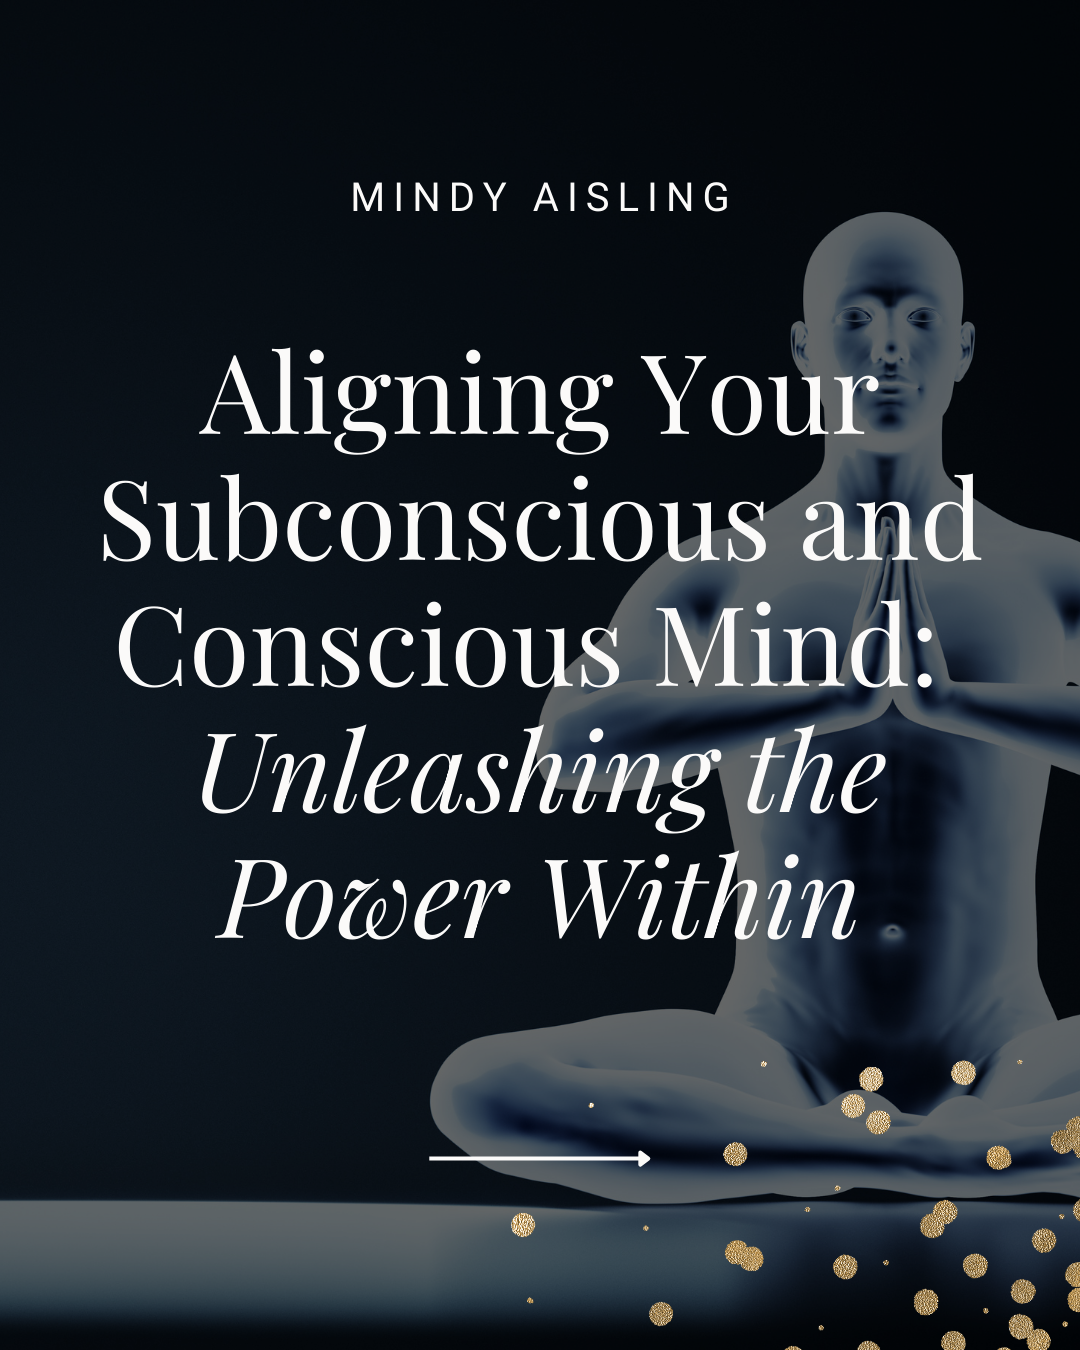 Aligning Your Subconscious and Conscious Mind: Unleashing the Power Within by Mindy Aisling